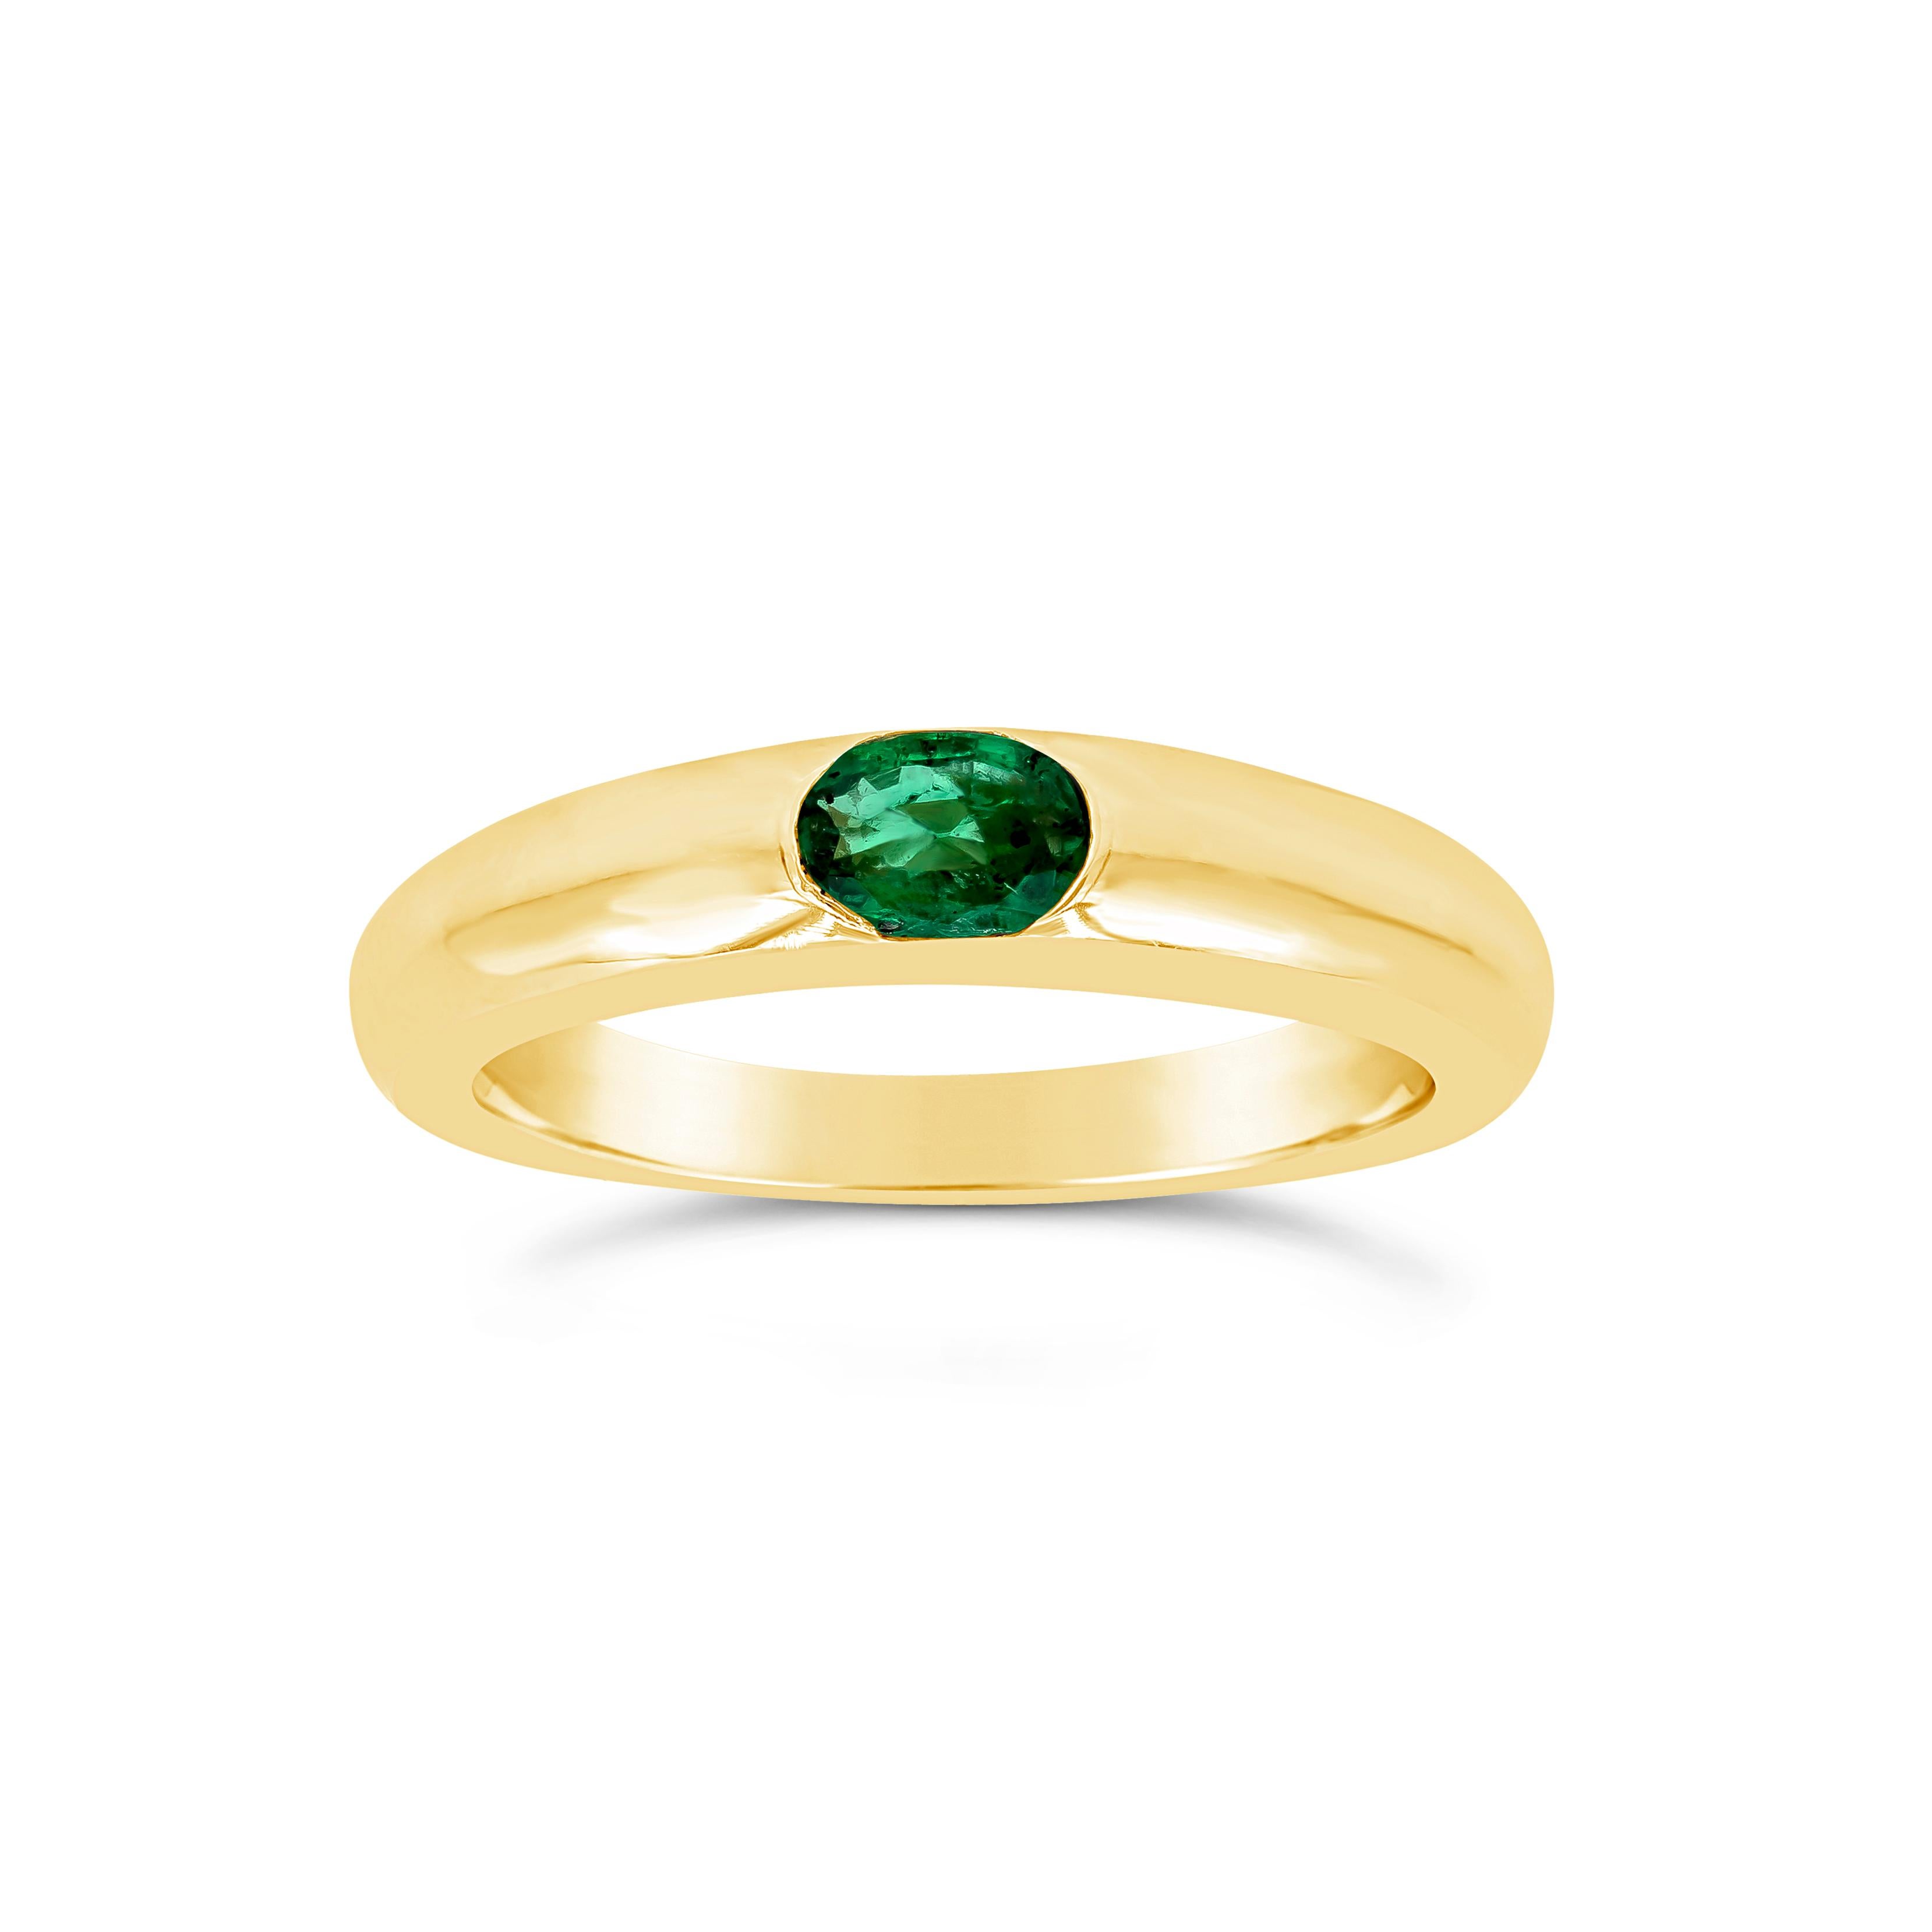 A simple and chic wedding band showcasing an oval cut color-rich green emerald, flush set in 14k yellow gold weighing 0.35 carats total. A simple ring perfect for both male and female. Size 6.5 US resizable upon request.

Style available in